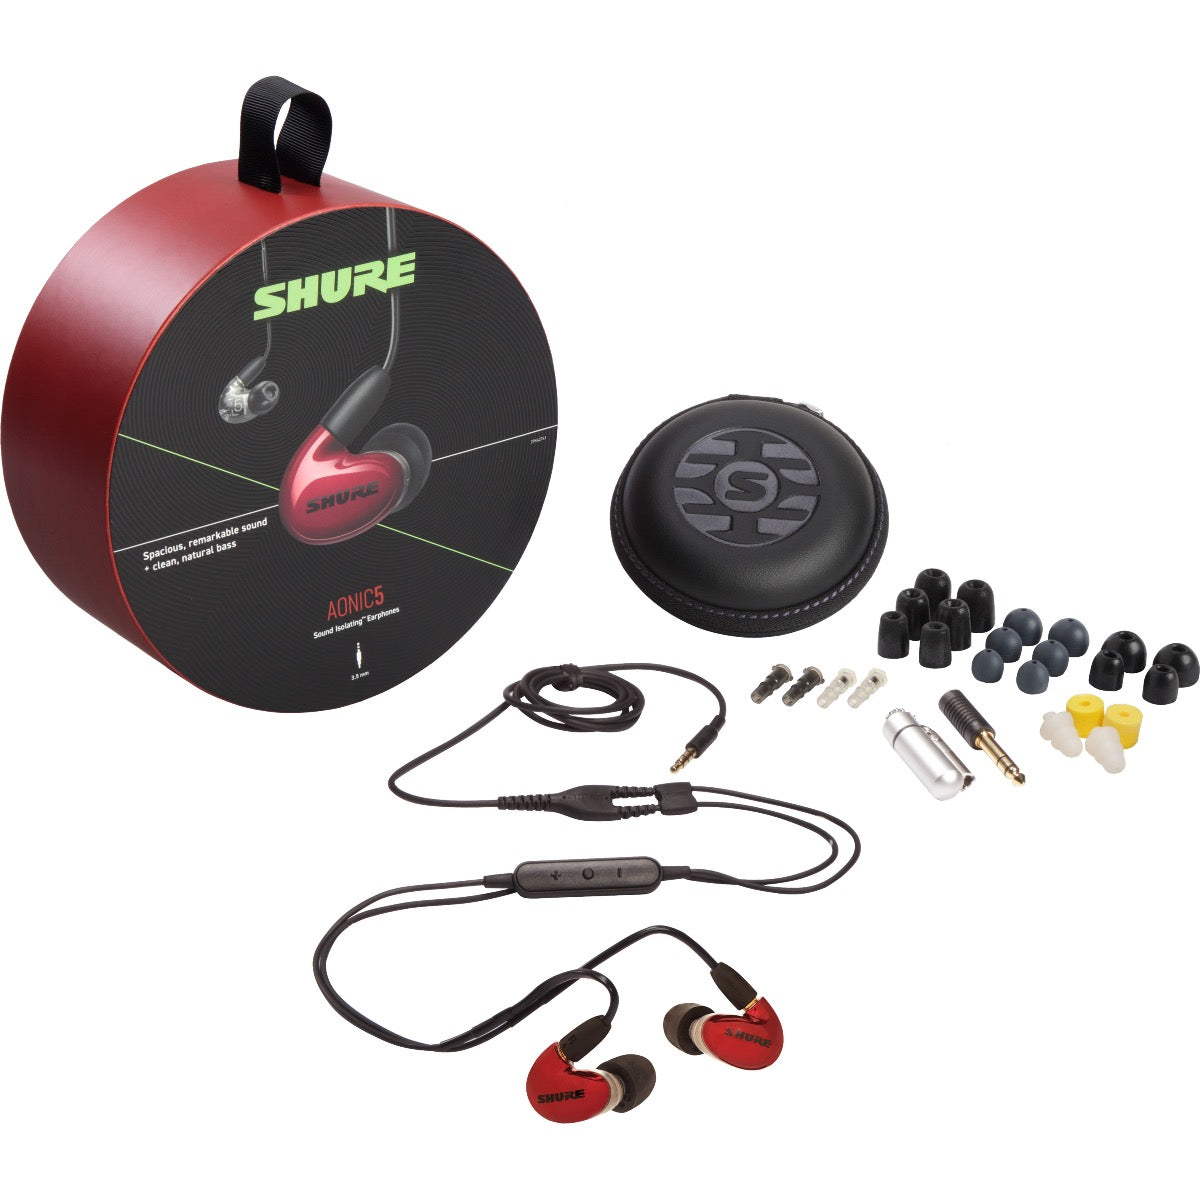 3/4 view of Shure AONIC 5 Sound Isolating Earphones - Red/Clear packaging and components showing front, top and left sides